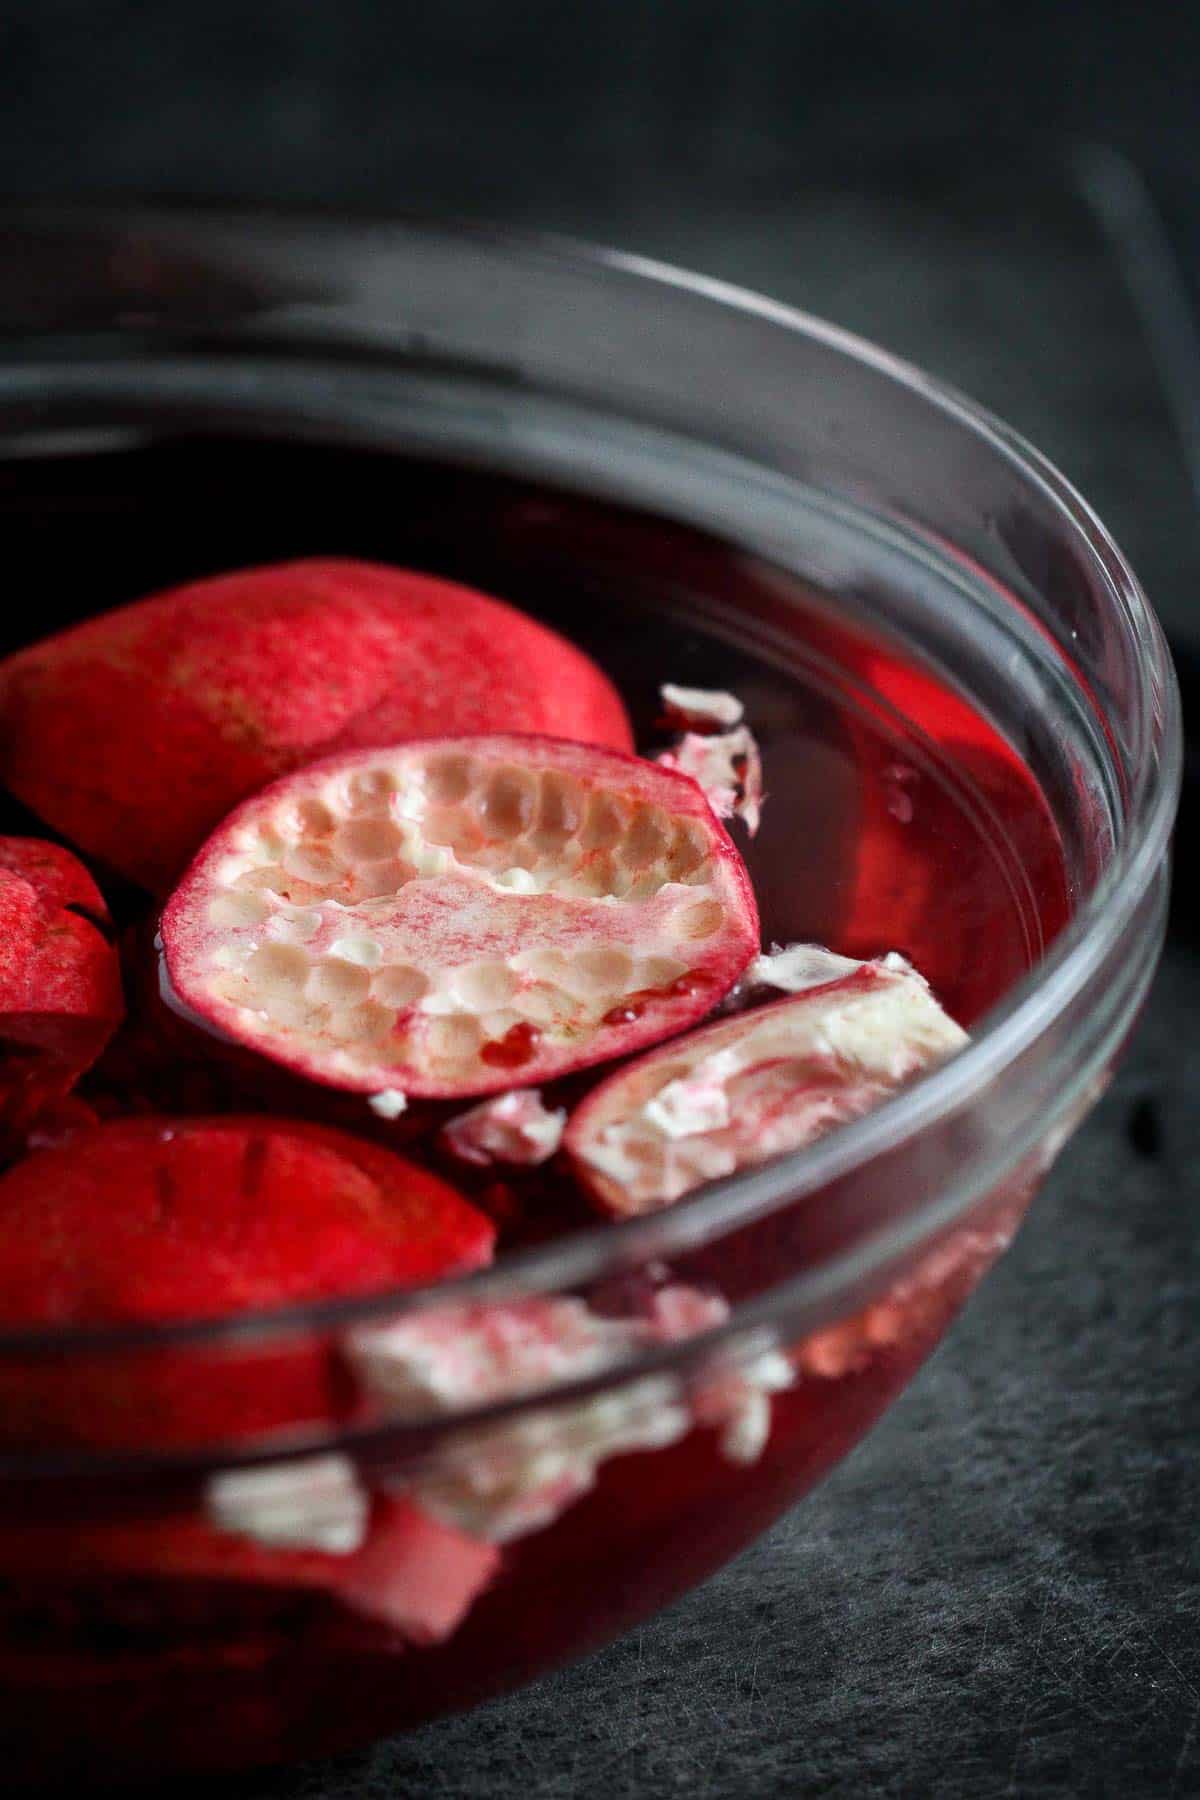 Pieces of pomegranate shell floating in a bowl of water.